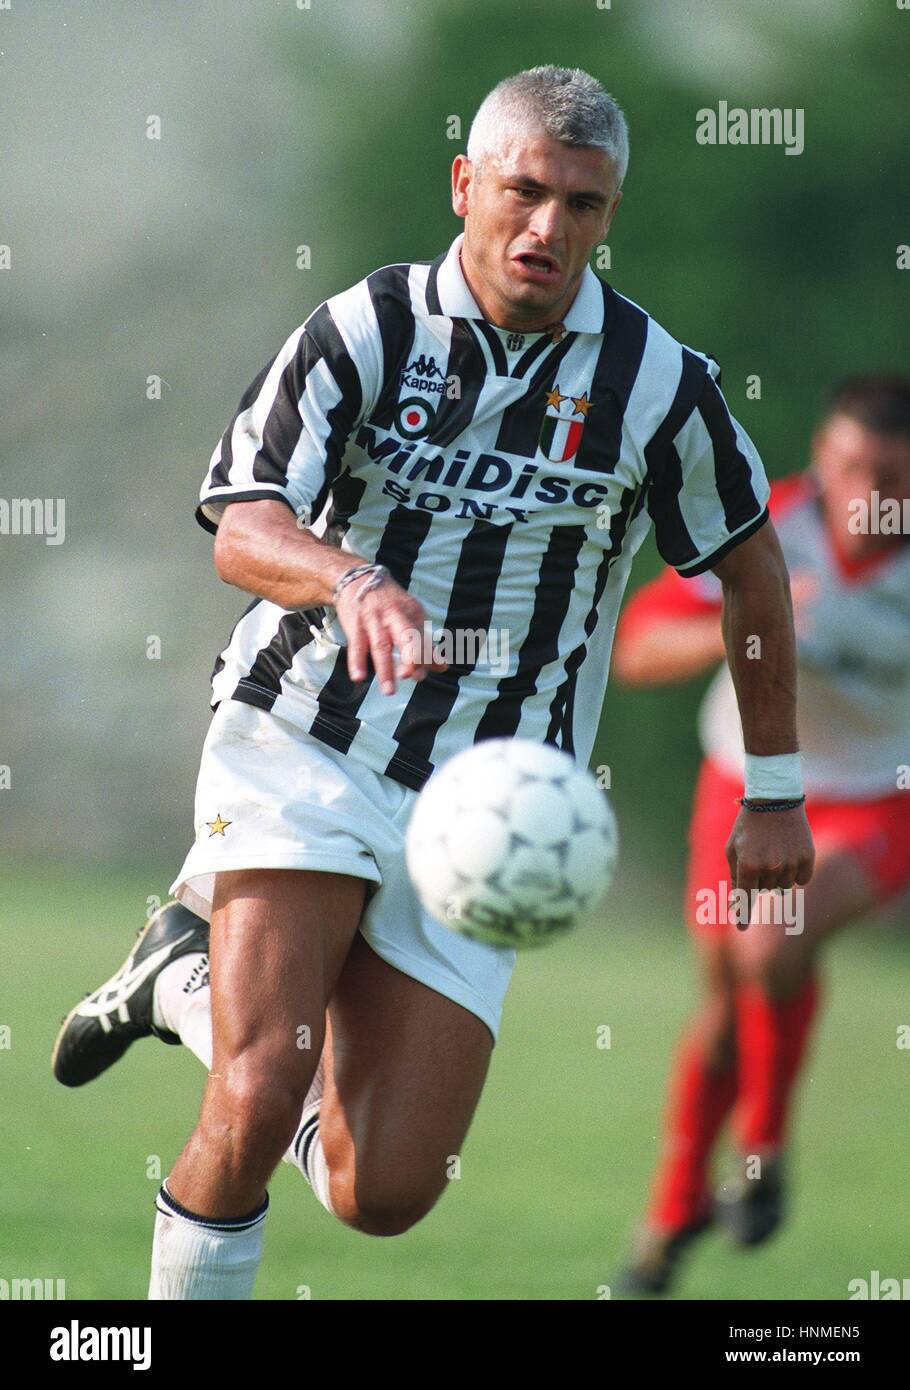 A classic bit of Fabrizio Ravanelli from 1995! We all know someone